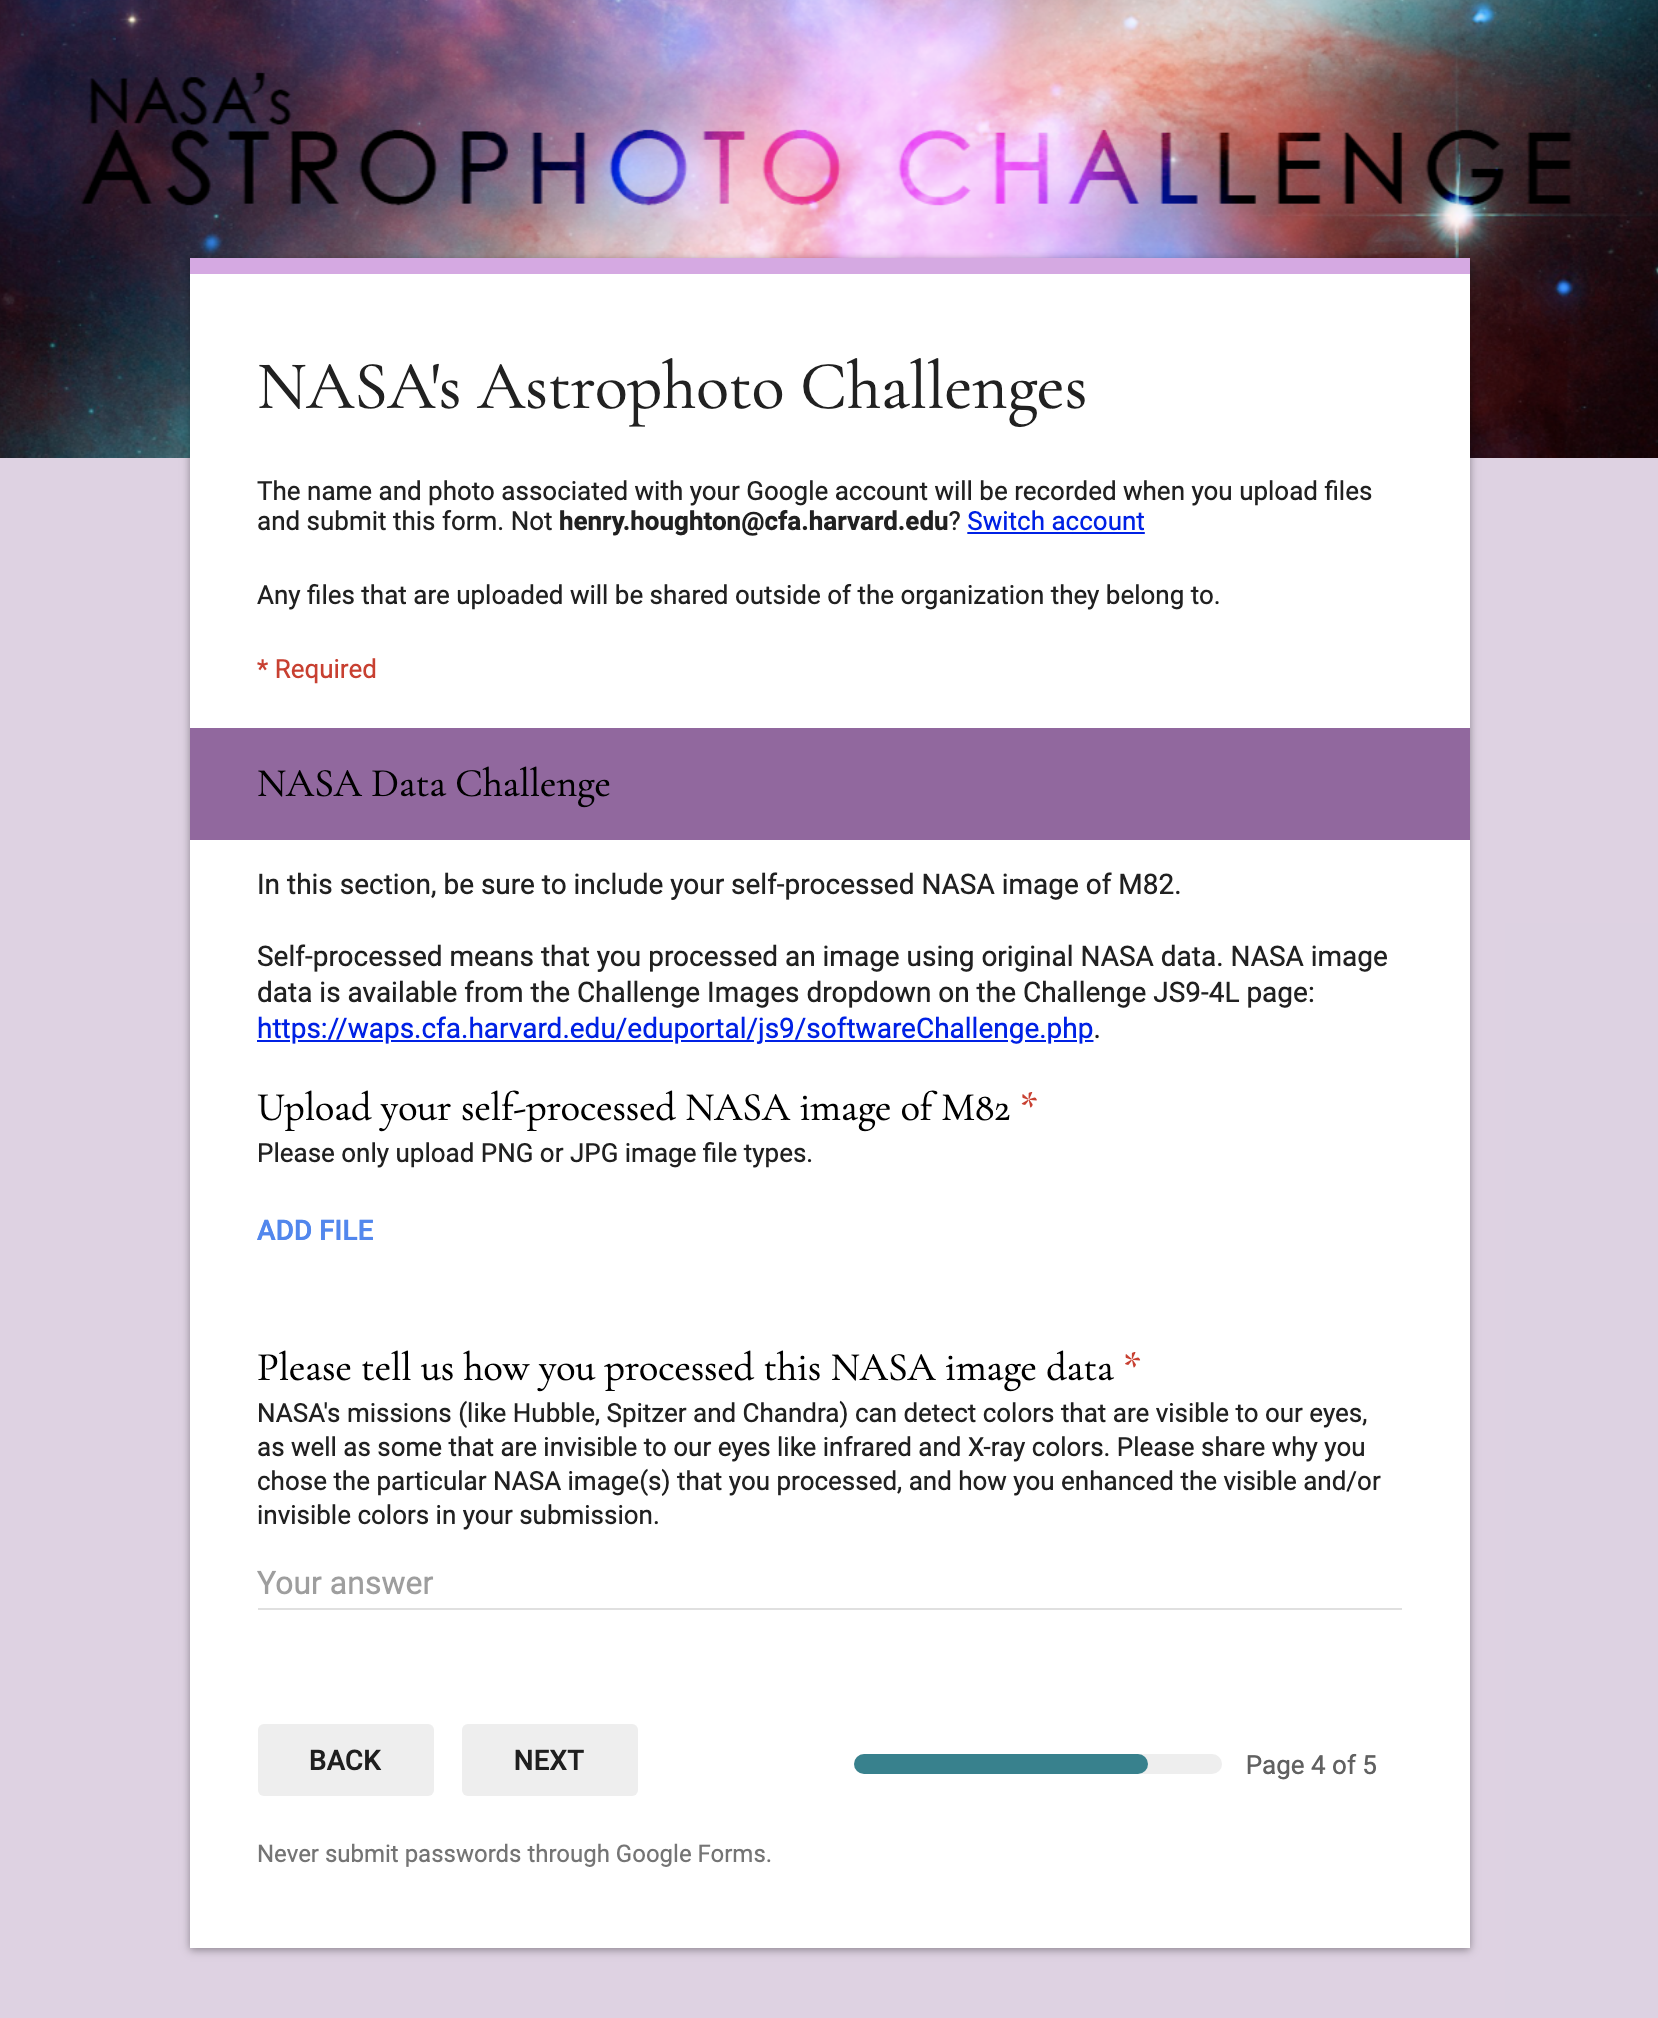 Screenshot of the NASA Astrophoto Challenge submition form